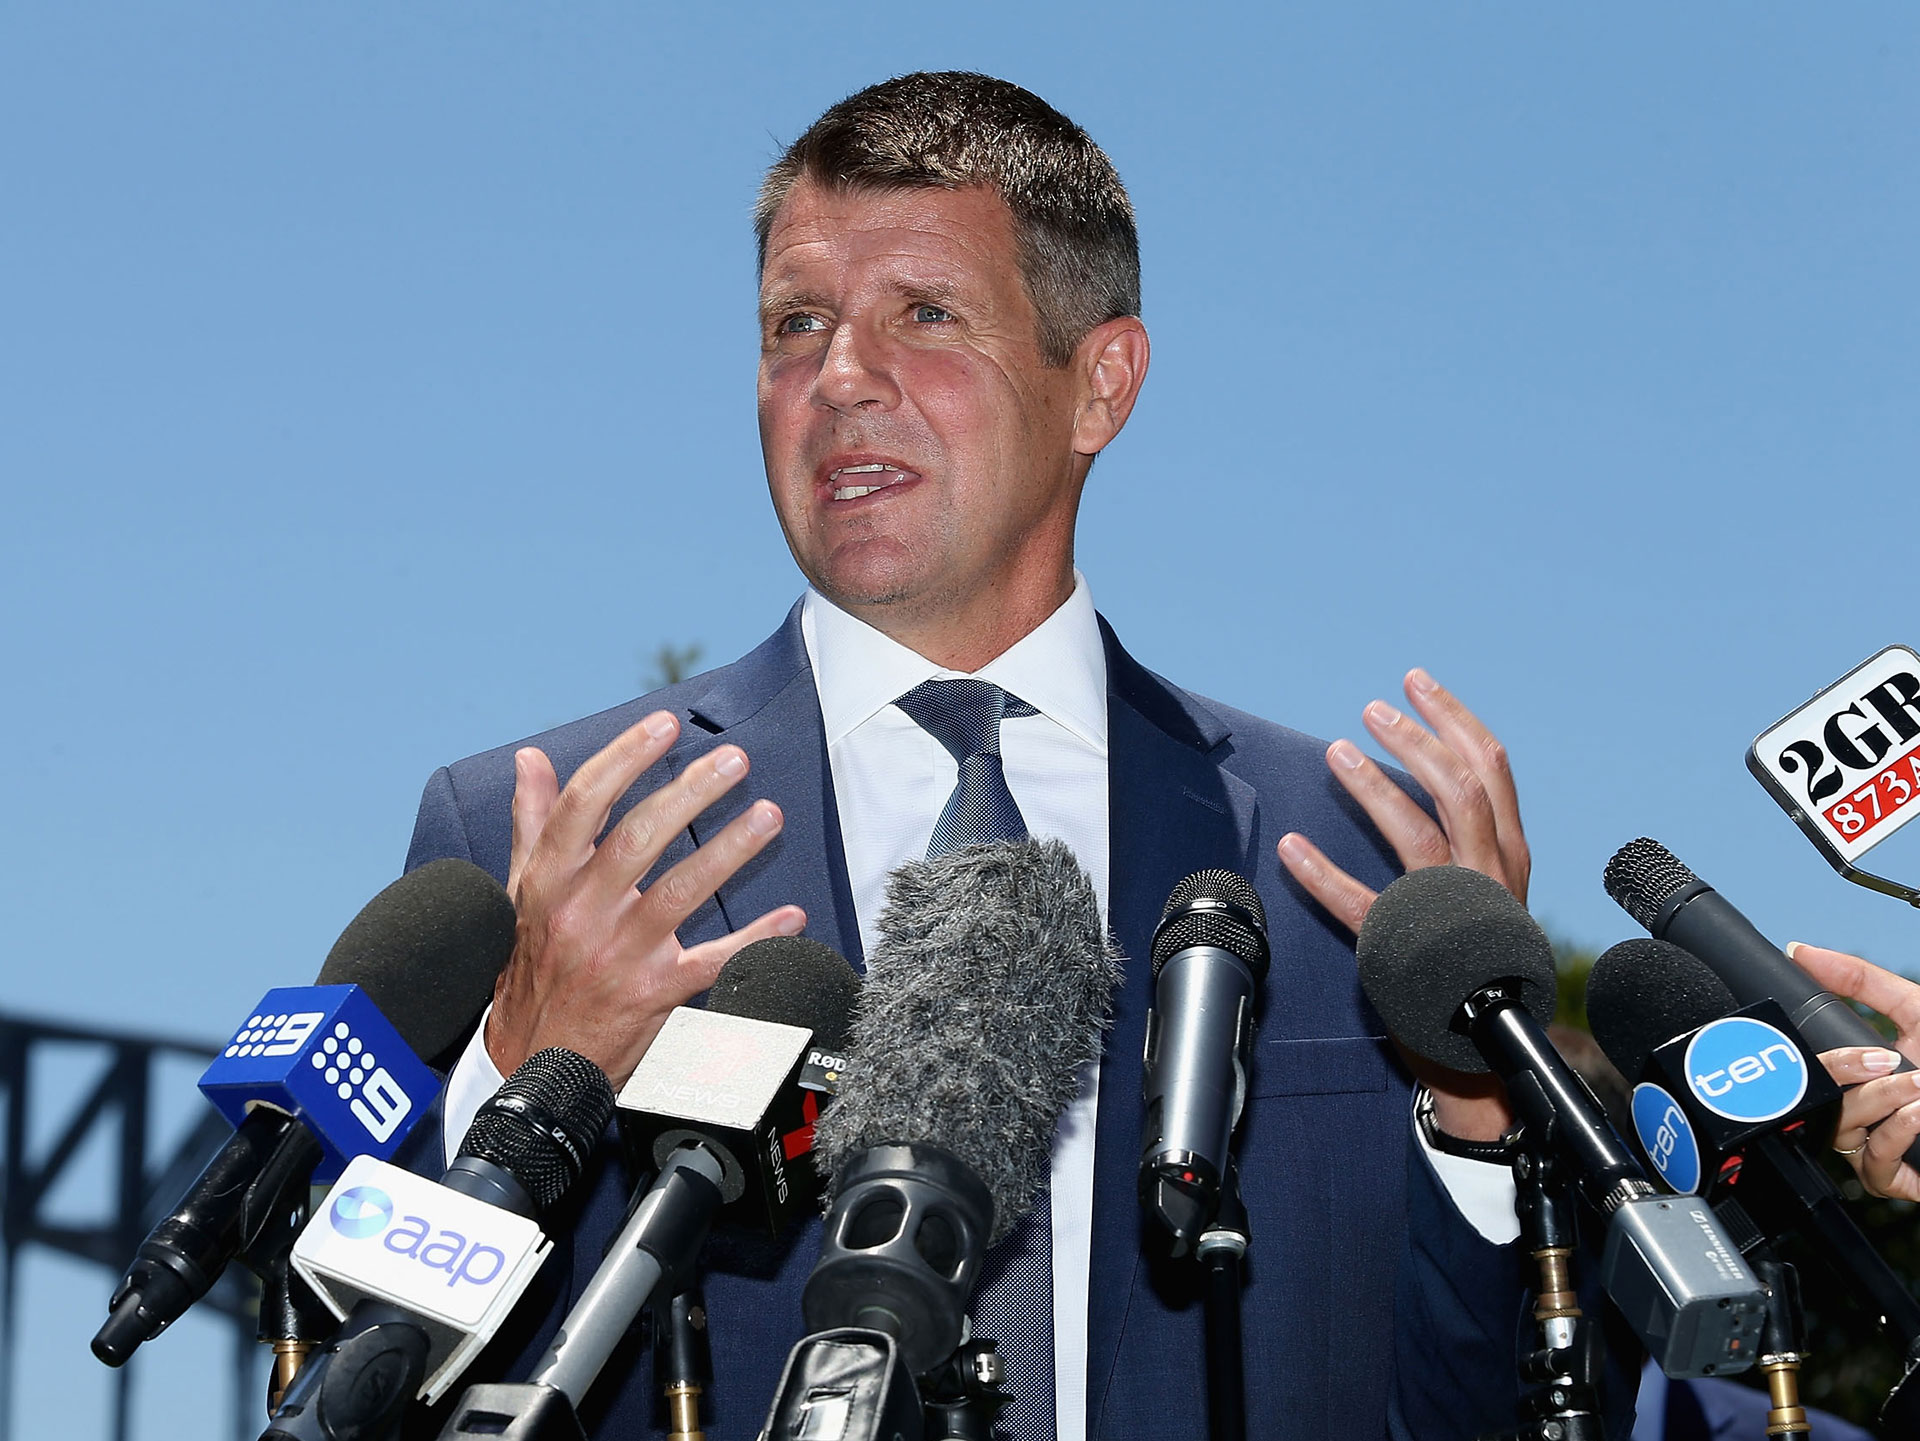 NSW Premier Mike Baird resigns from politics